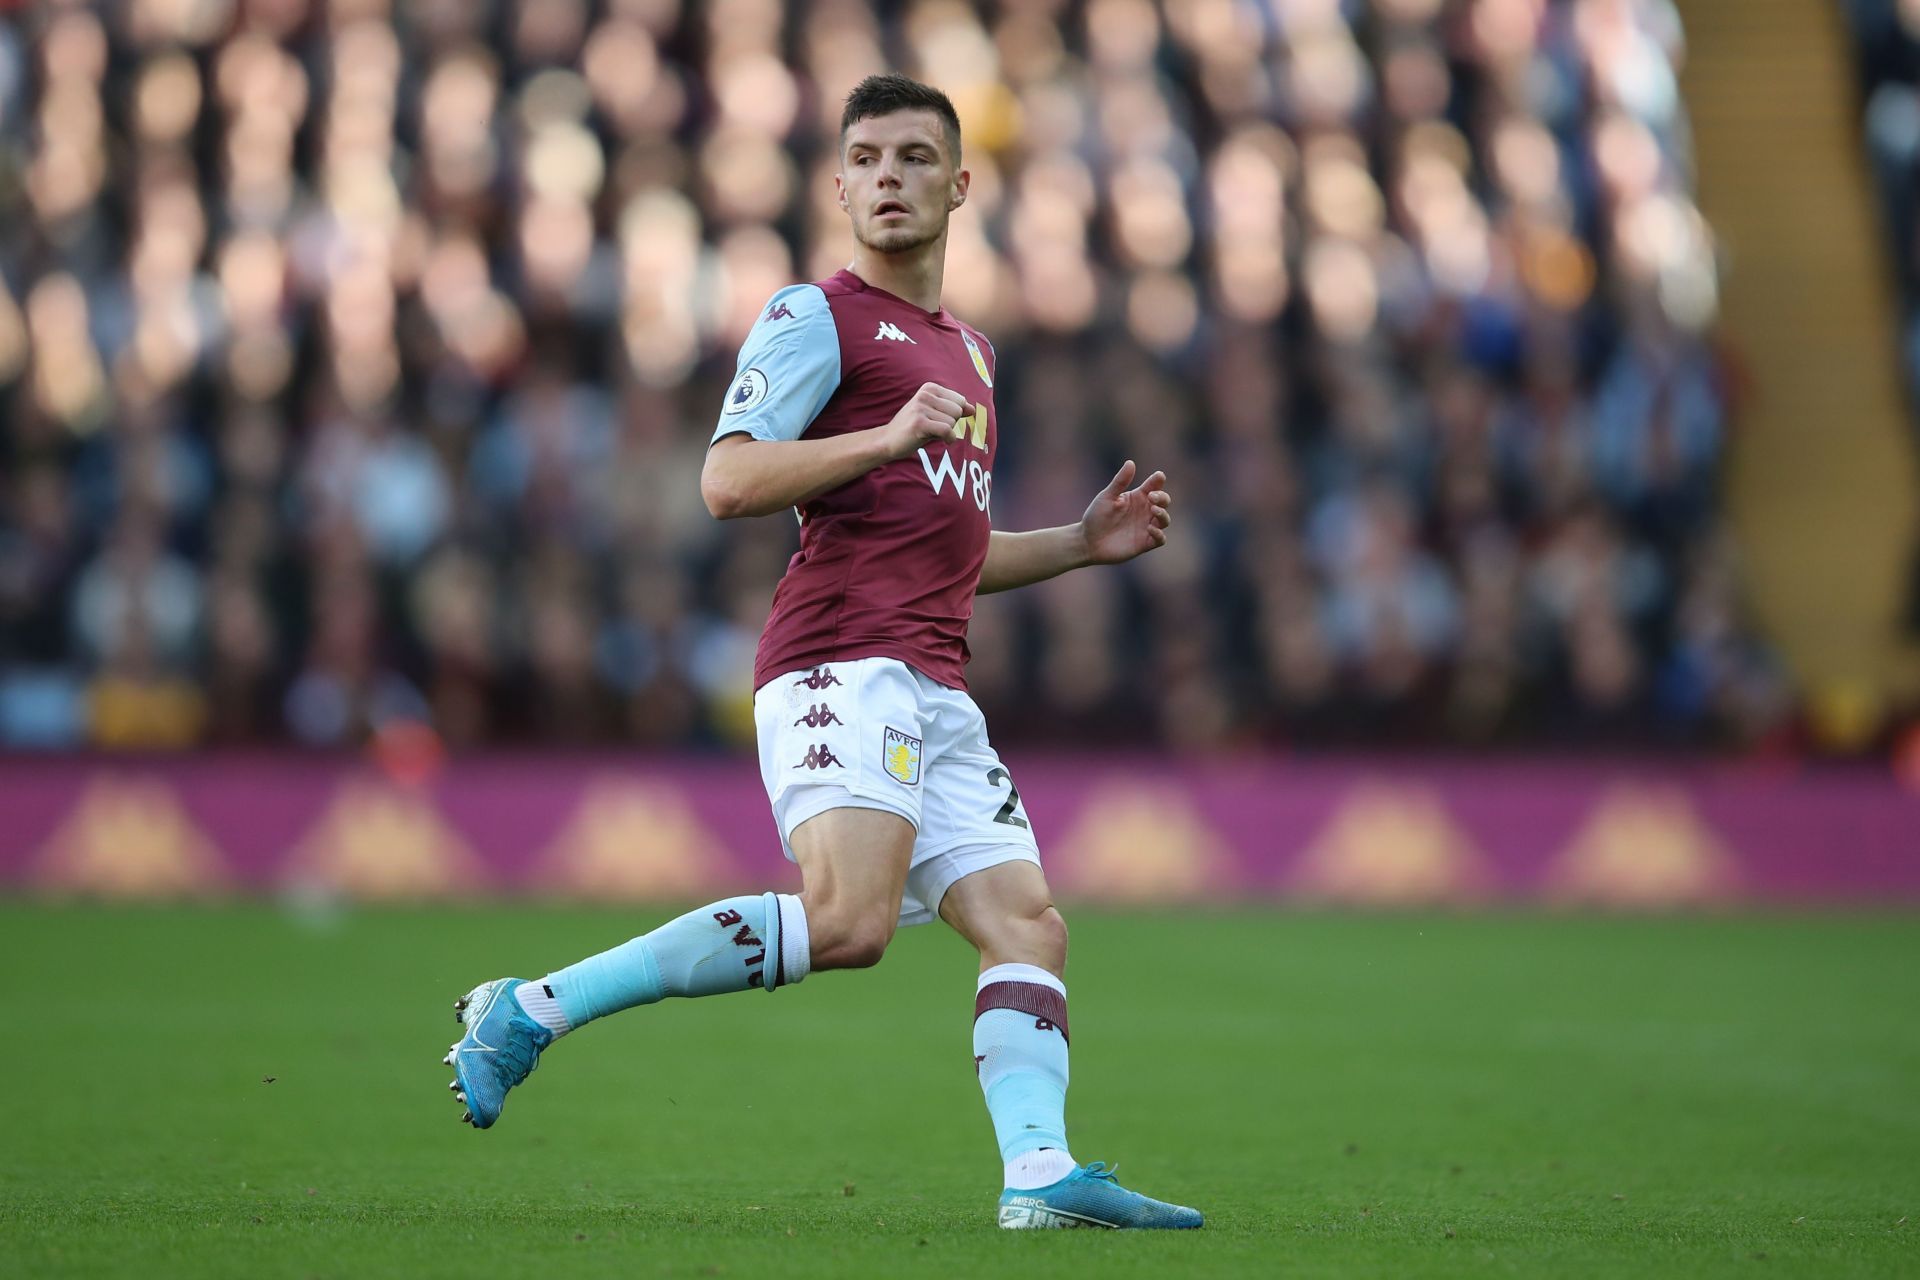 Guilbert joined Villa in 2019 but is out on loan now